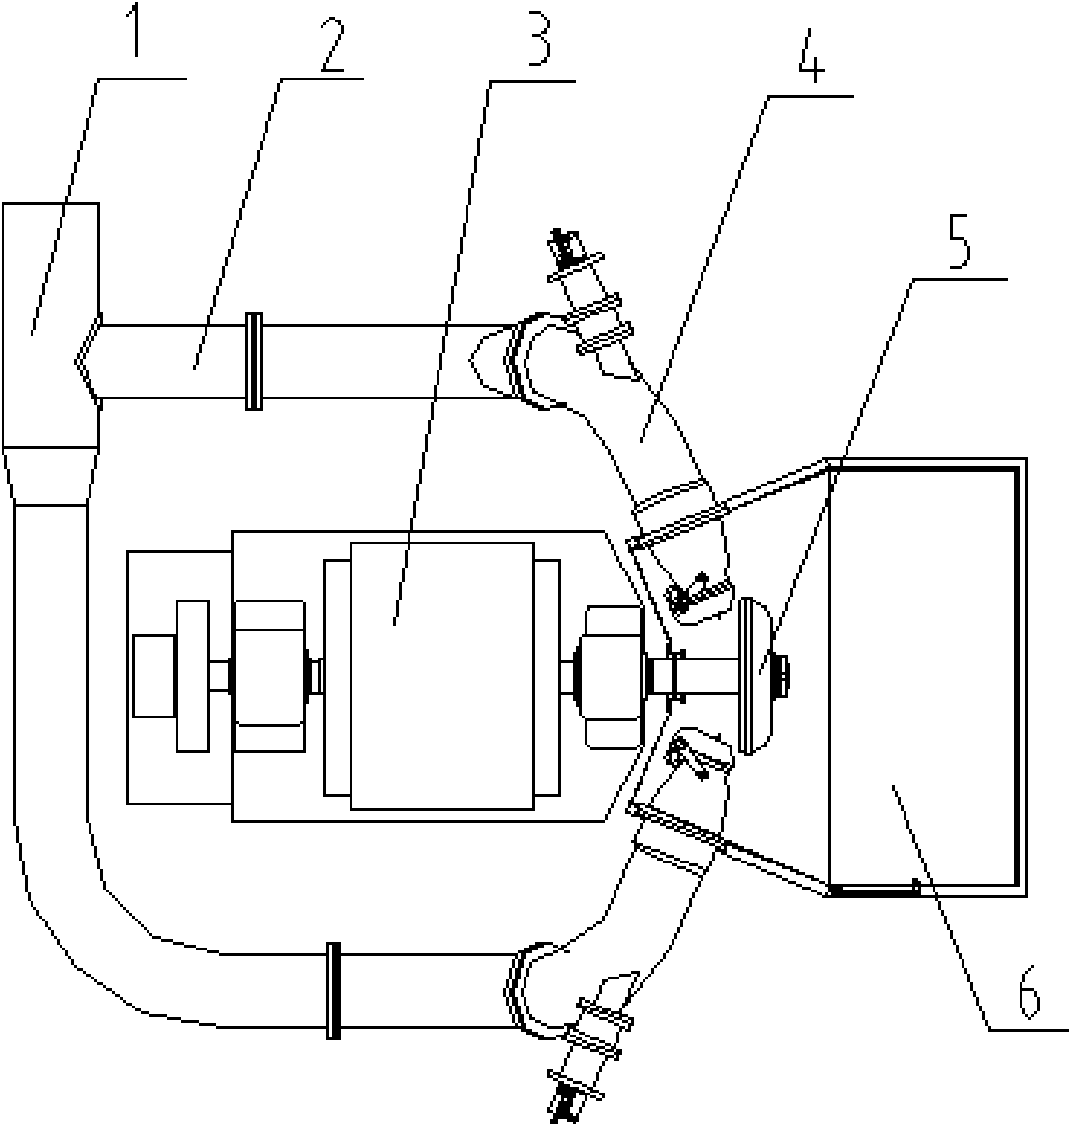 Multi-nozzle high-efficiency large capacity inclined jet turbine